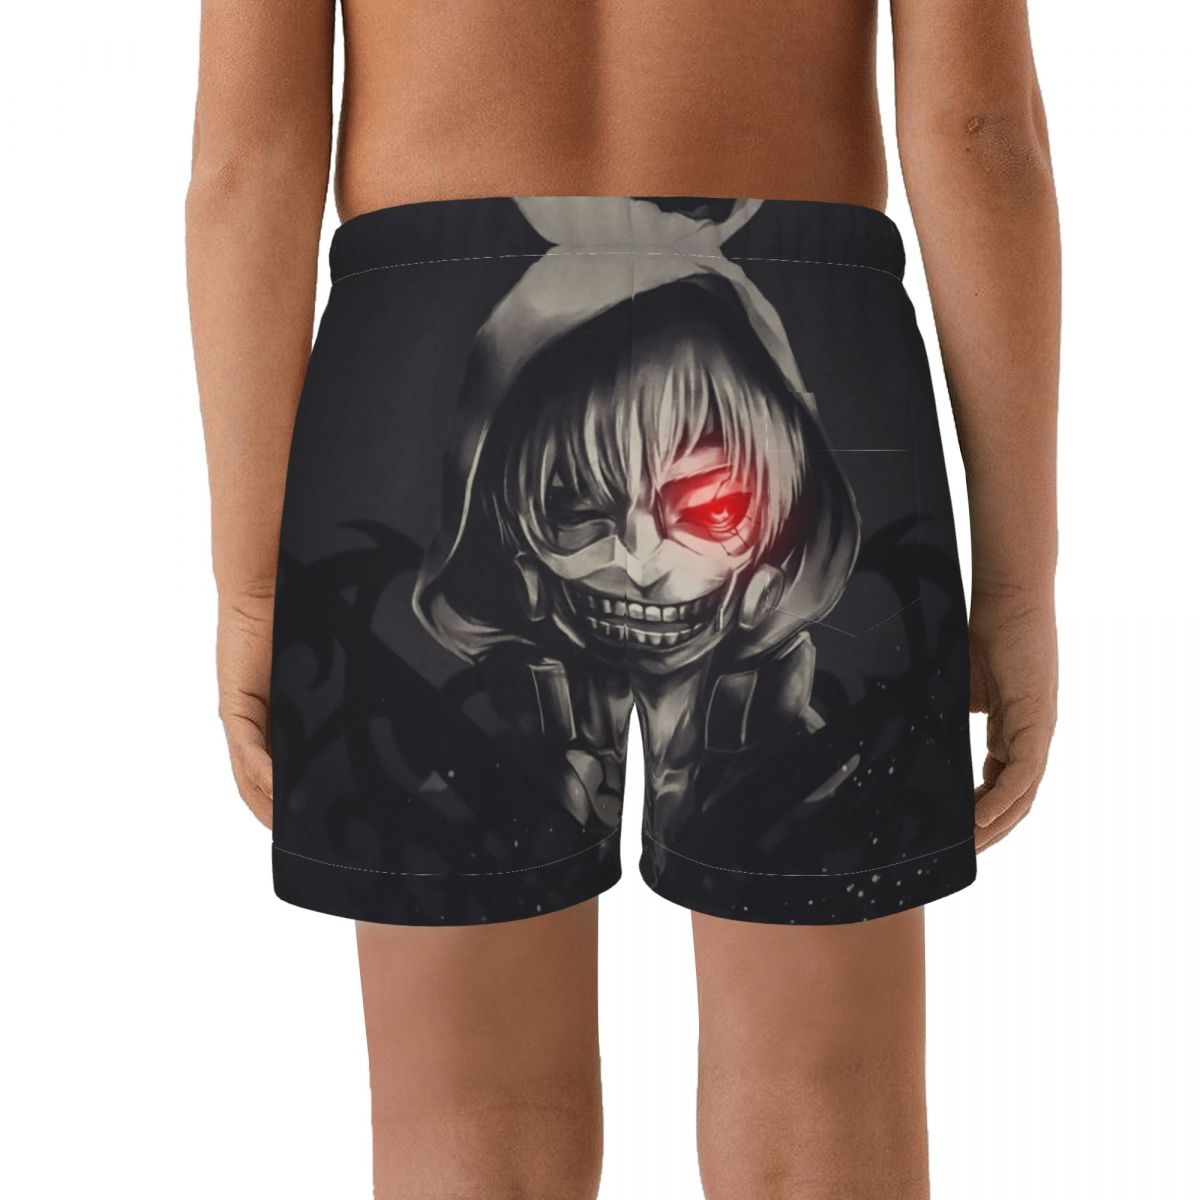 Tokyo Ghoul Shorts boy Quick Dry Swimwear Swimsuits Swim Boxer Trunks Surf Board Shorts With belt 1 - Anime Swimsuits